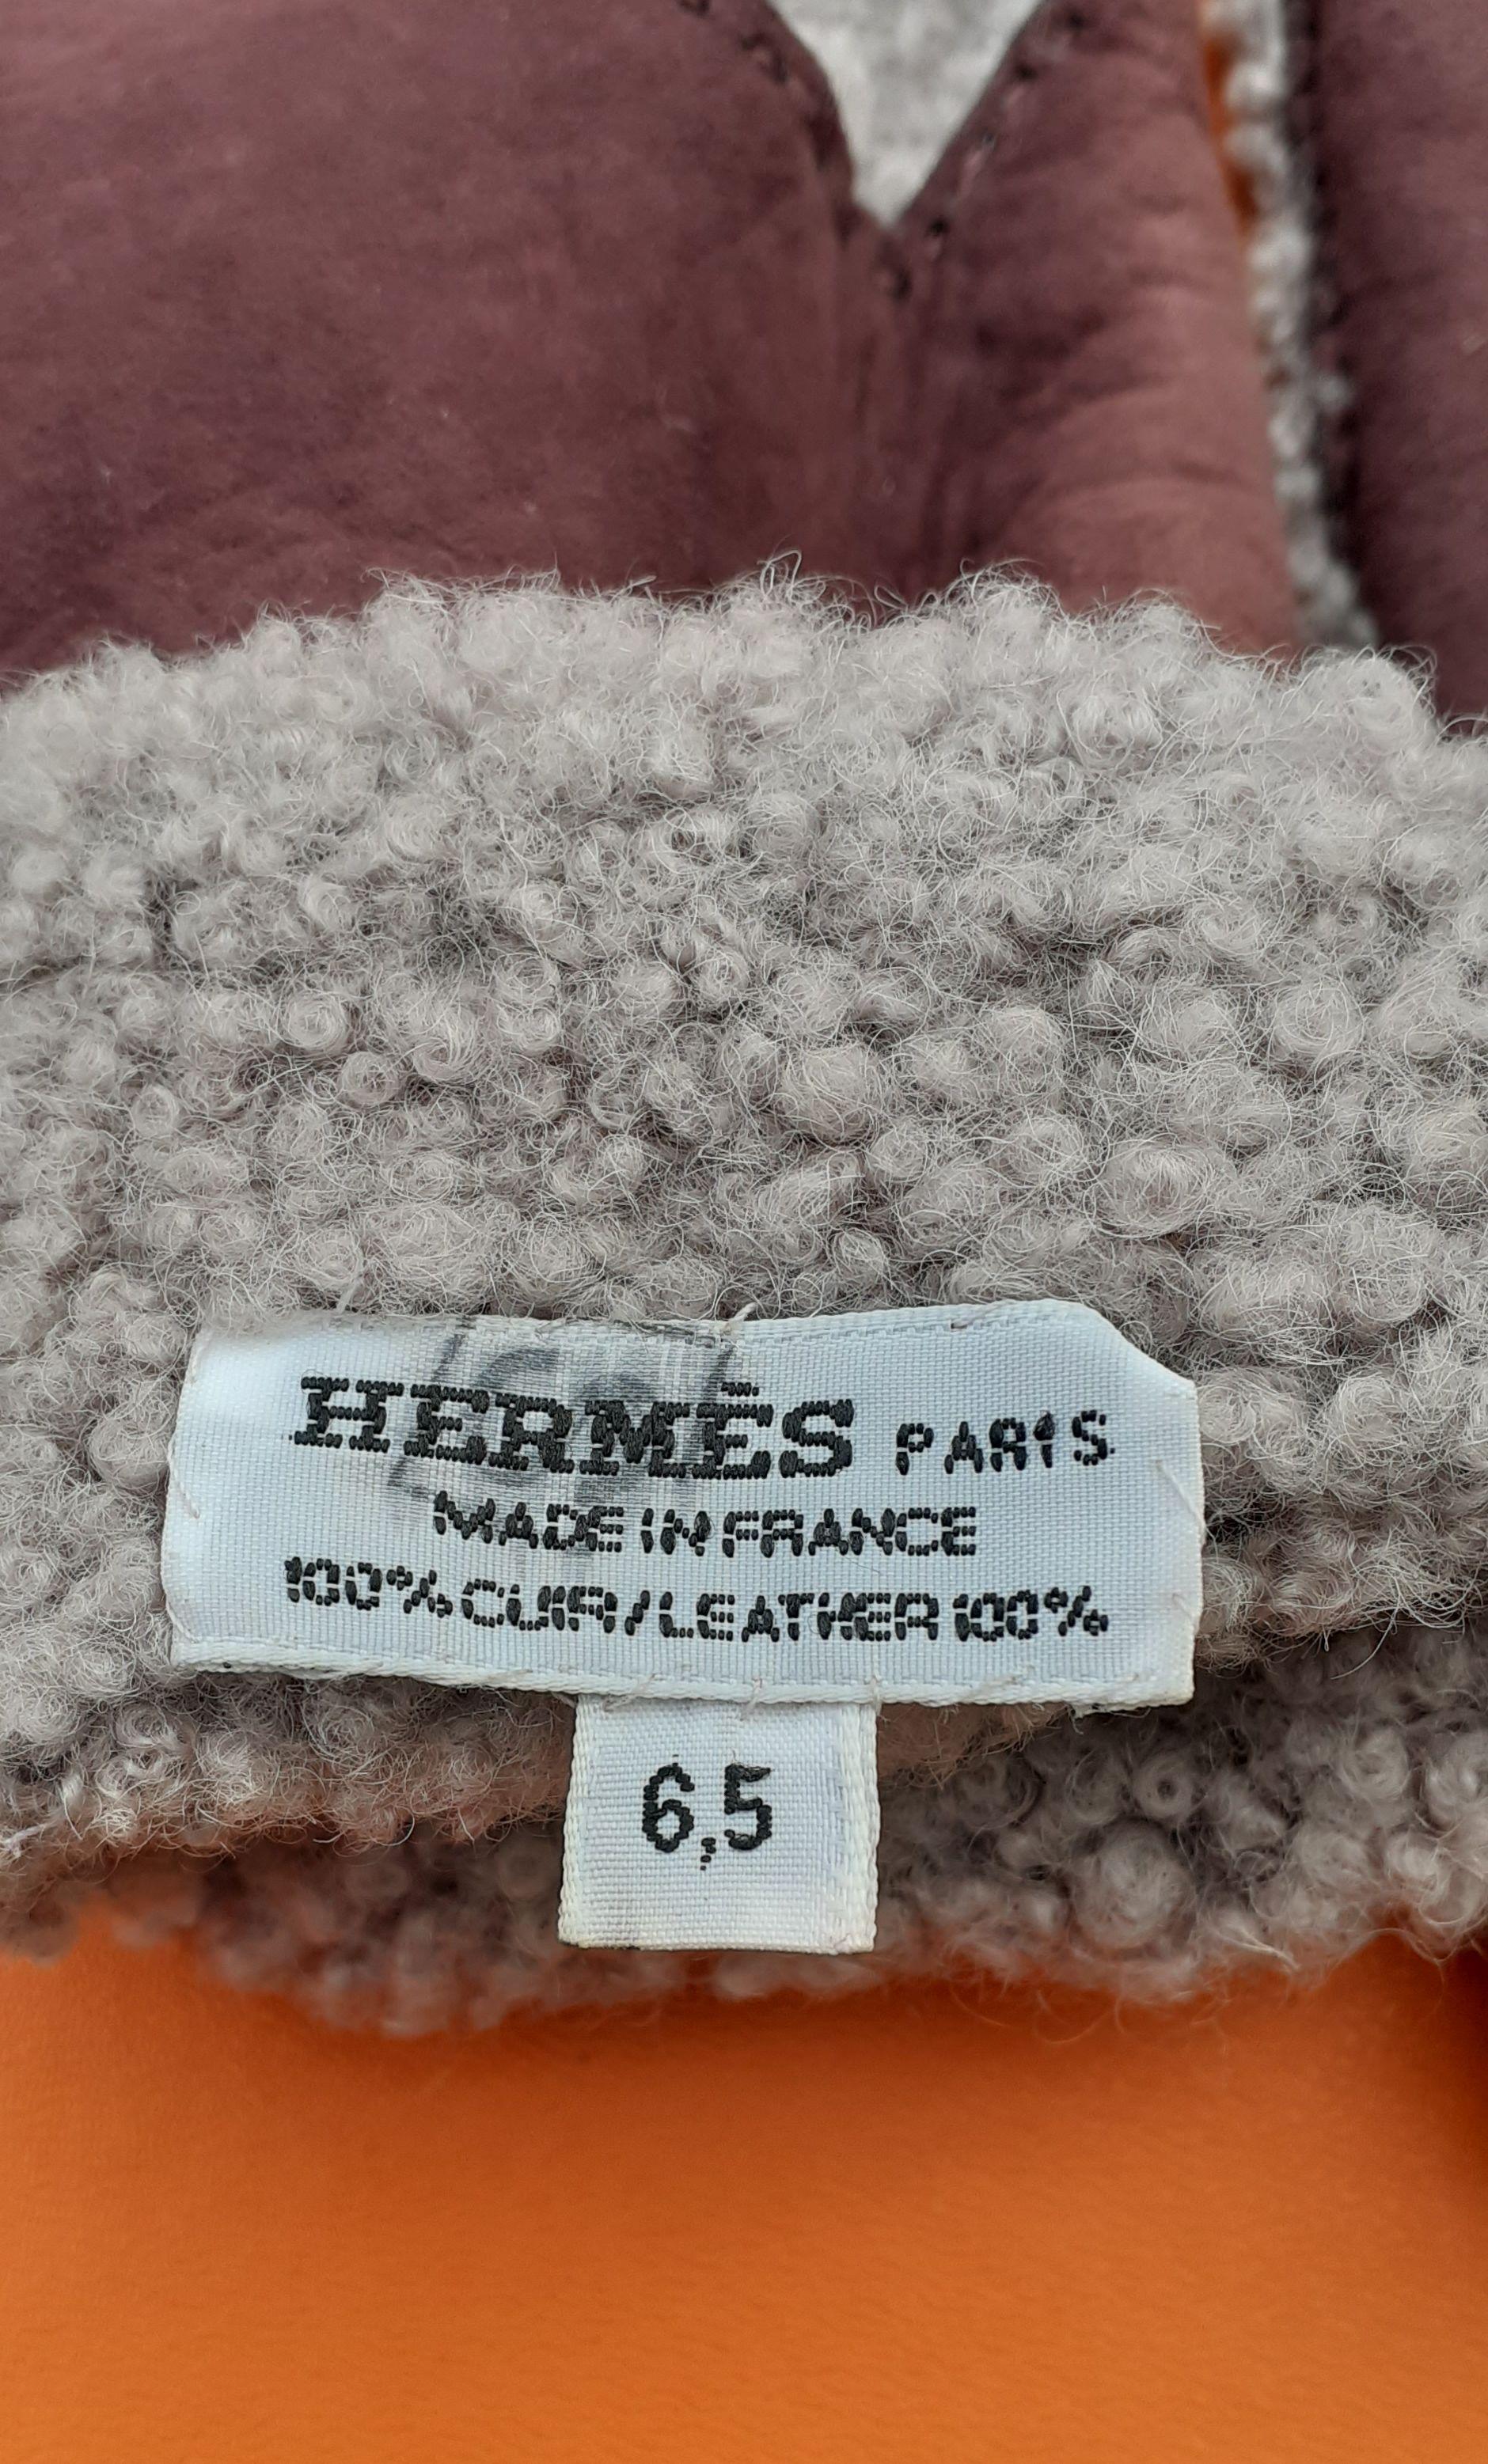 Hermès Open Gloves Mittens Teddy Plush Shearling Leather Wool Purple Size 6.5 For Sale 4